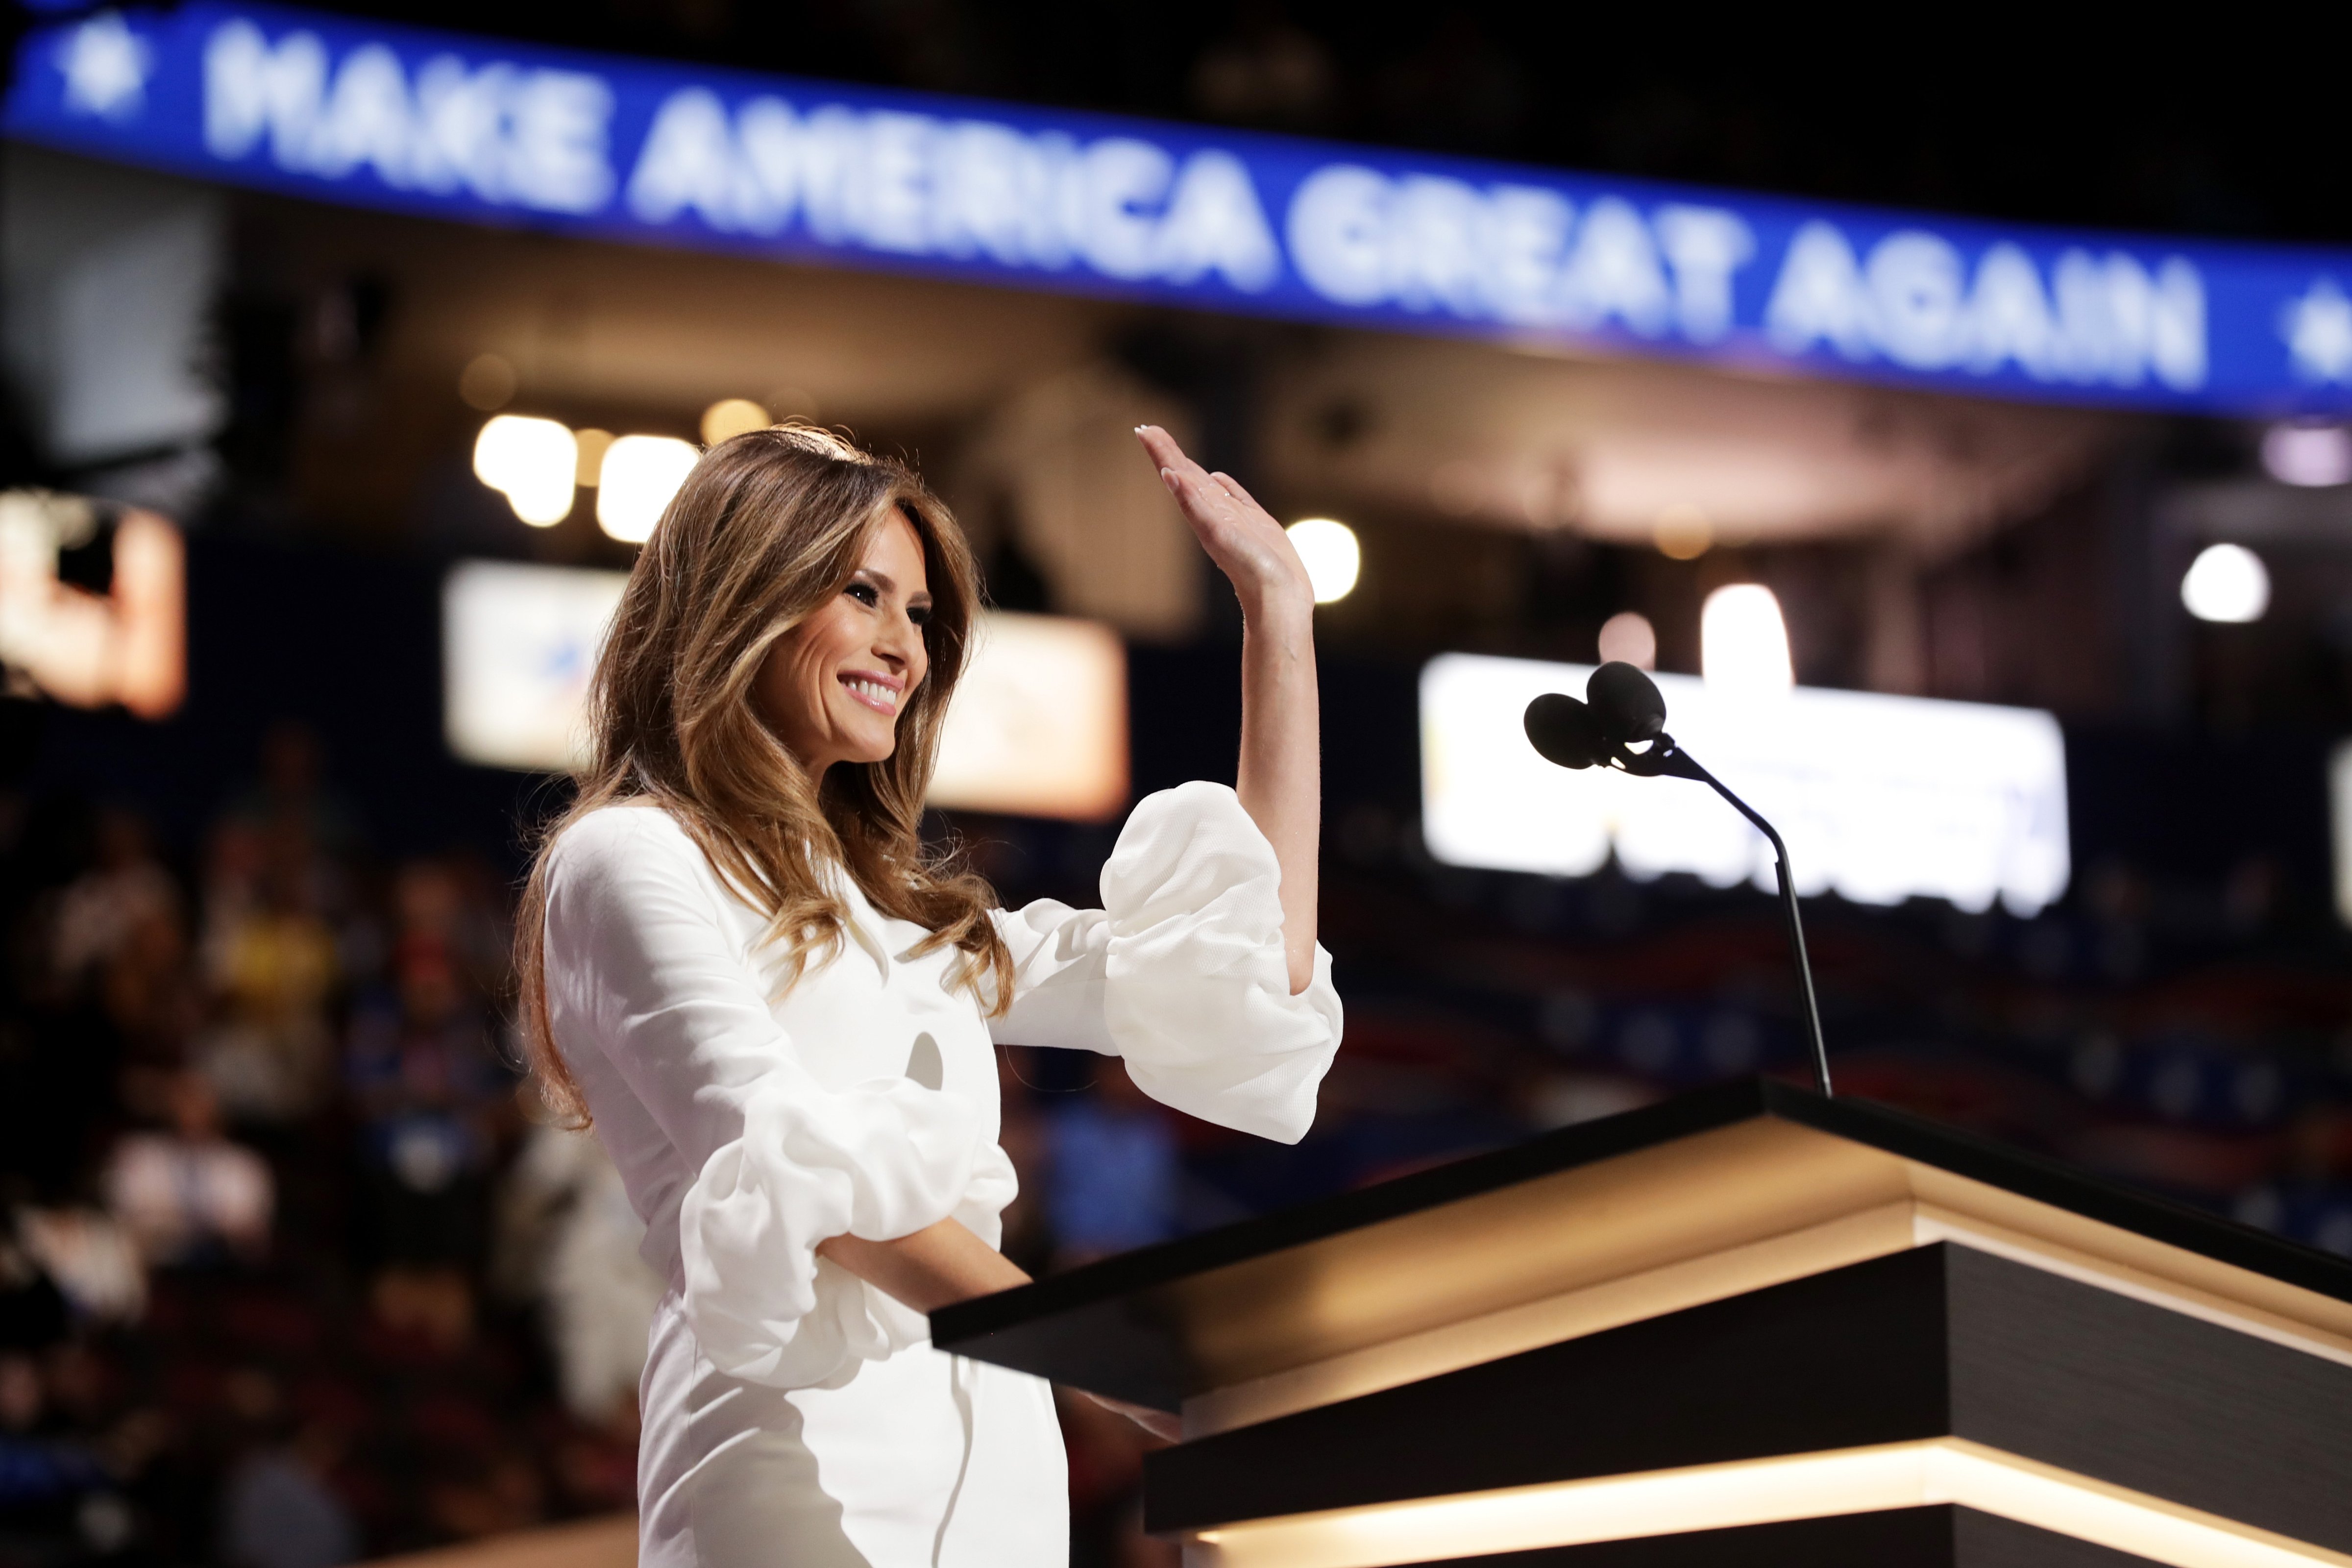 Melania Trump, wife of Presumptive Republican presidential nominee Donald Trump, waves to the crowd after delivering a speech on the first day of the Republican National Convention on July 18, 2016 at the Quicken Loans Arena in Cleveland, Ohio. (Chip Somodevilla—Getty Images)